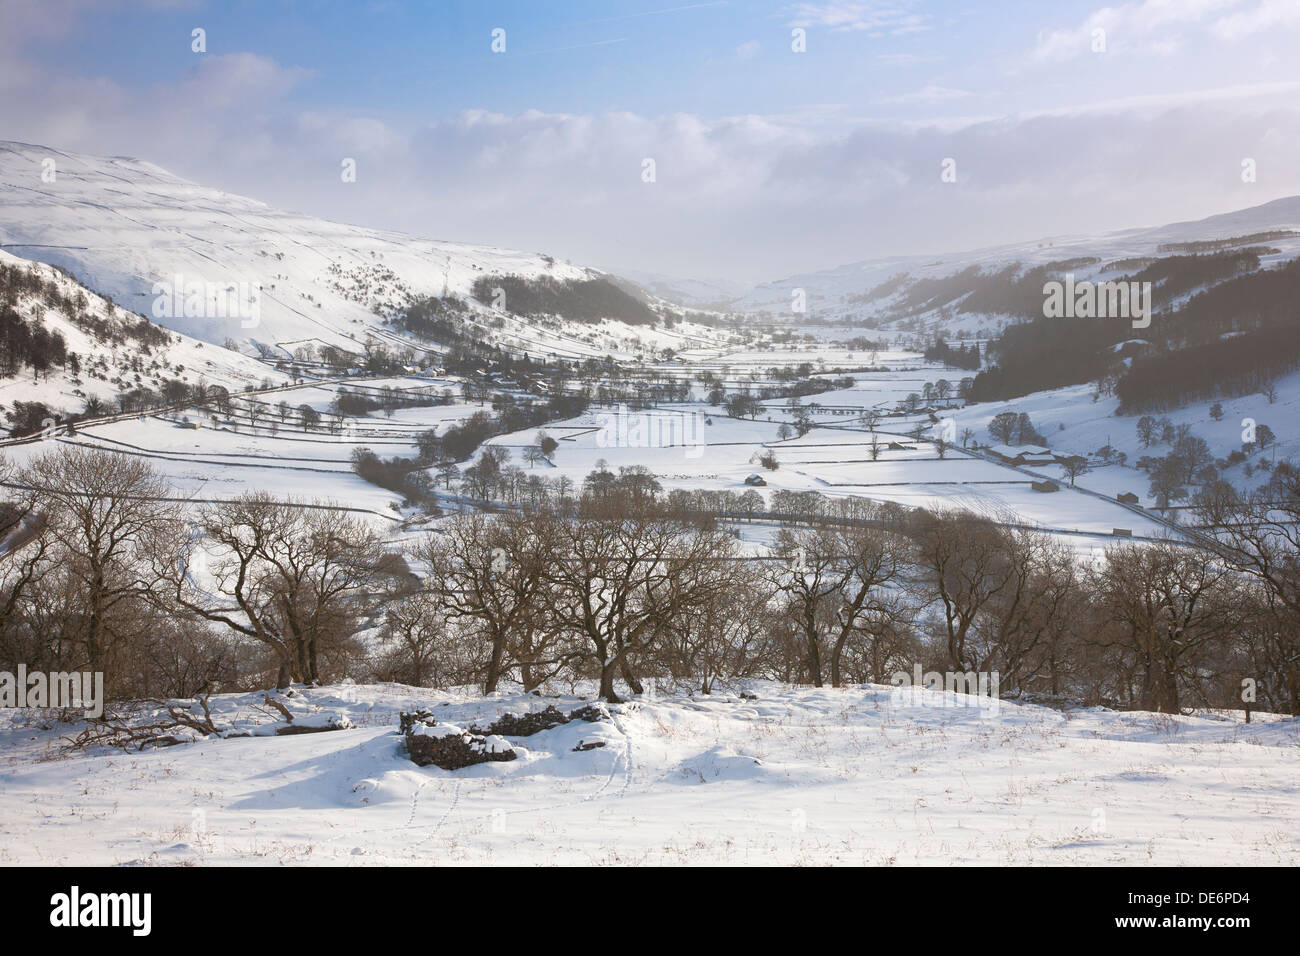 View over Wharfedale towards Buckden Pike from near Cray, Upper Wharfedale, Yorkshire Dales, UK Stock Photo